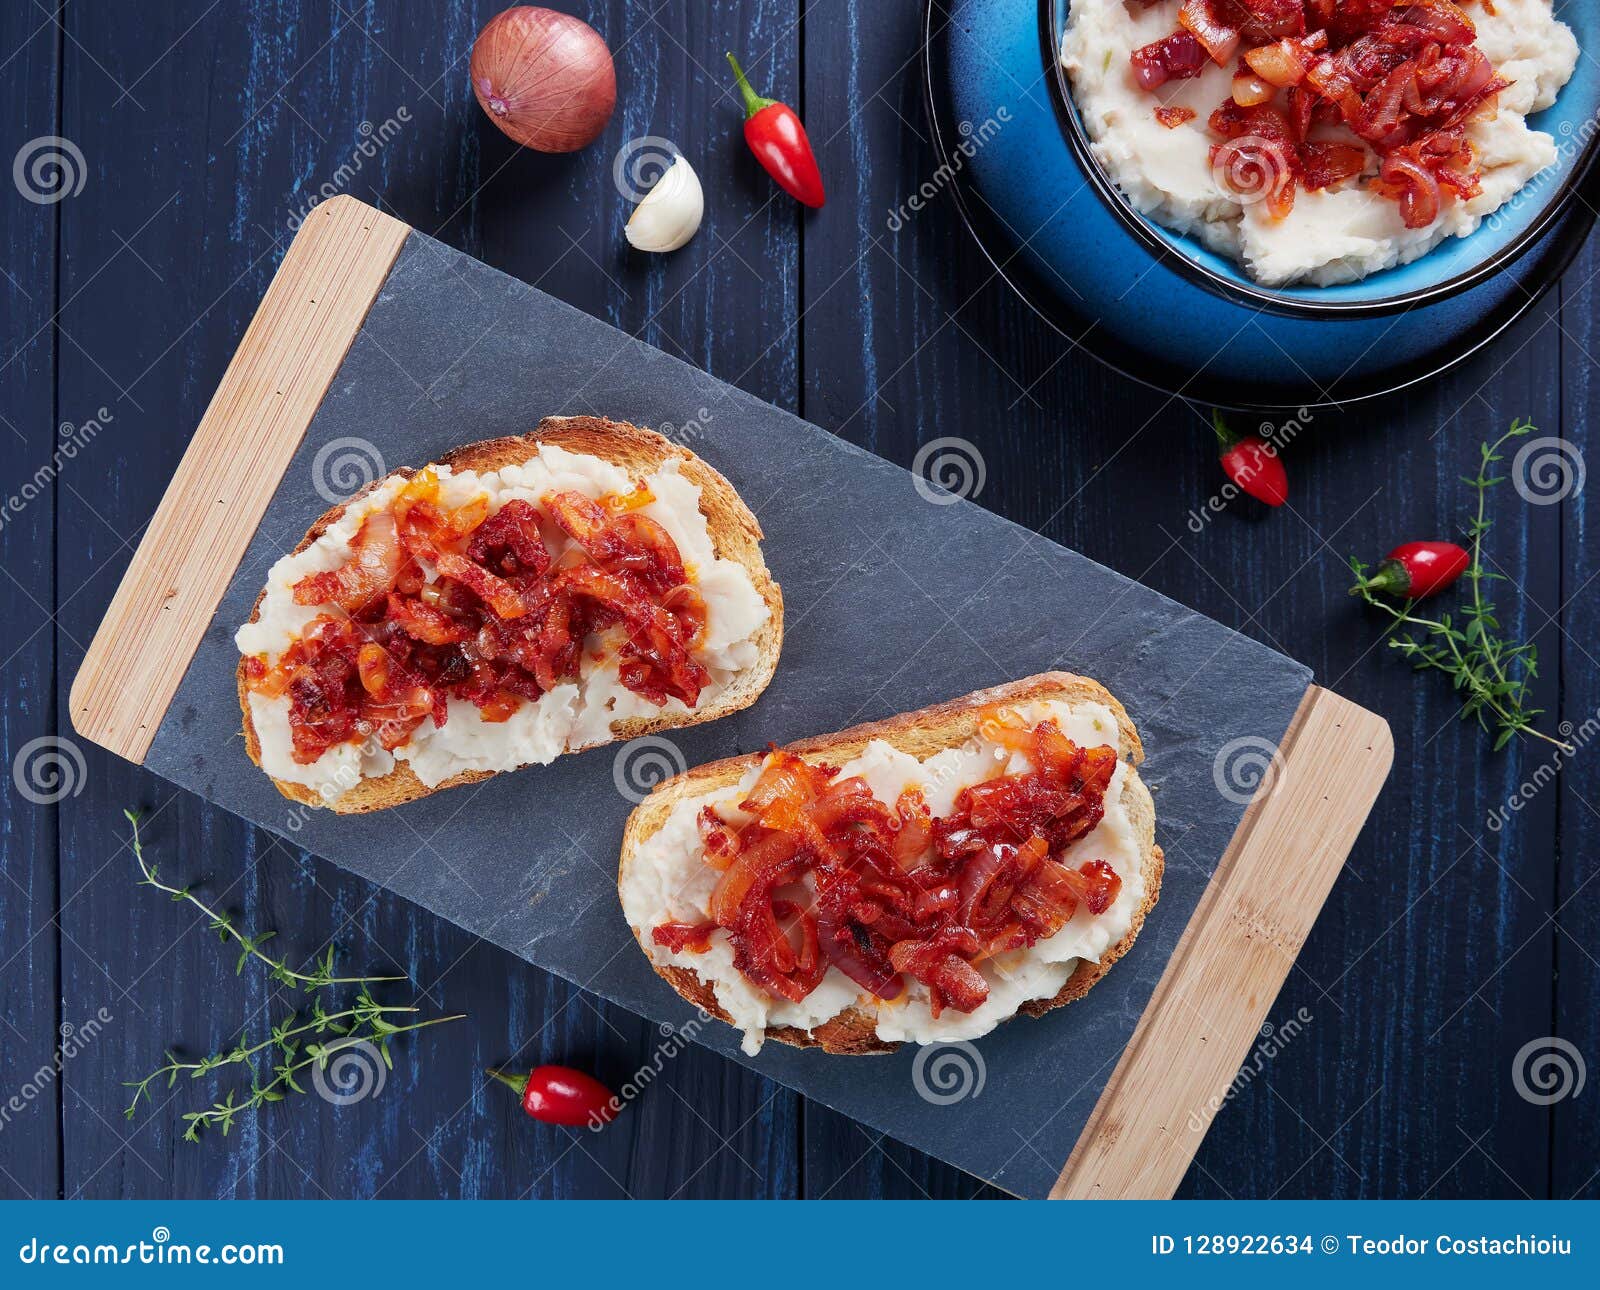 mashed beans spread with garlic and vegetable oil, with a topping of sauteed onions and tomato paste romanian: fasole batuta